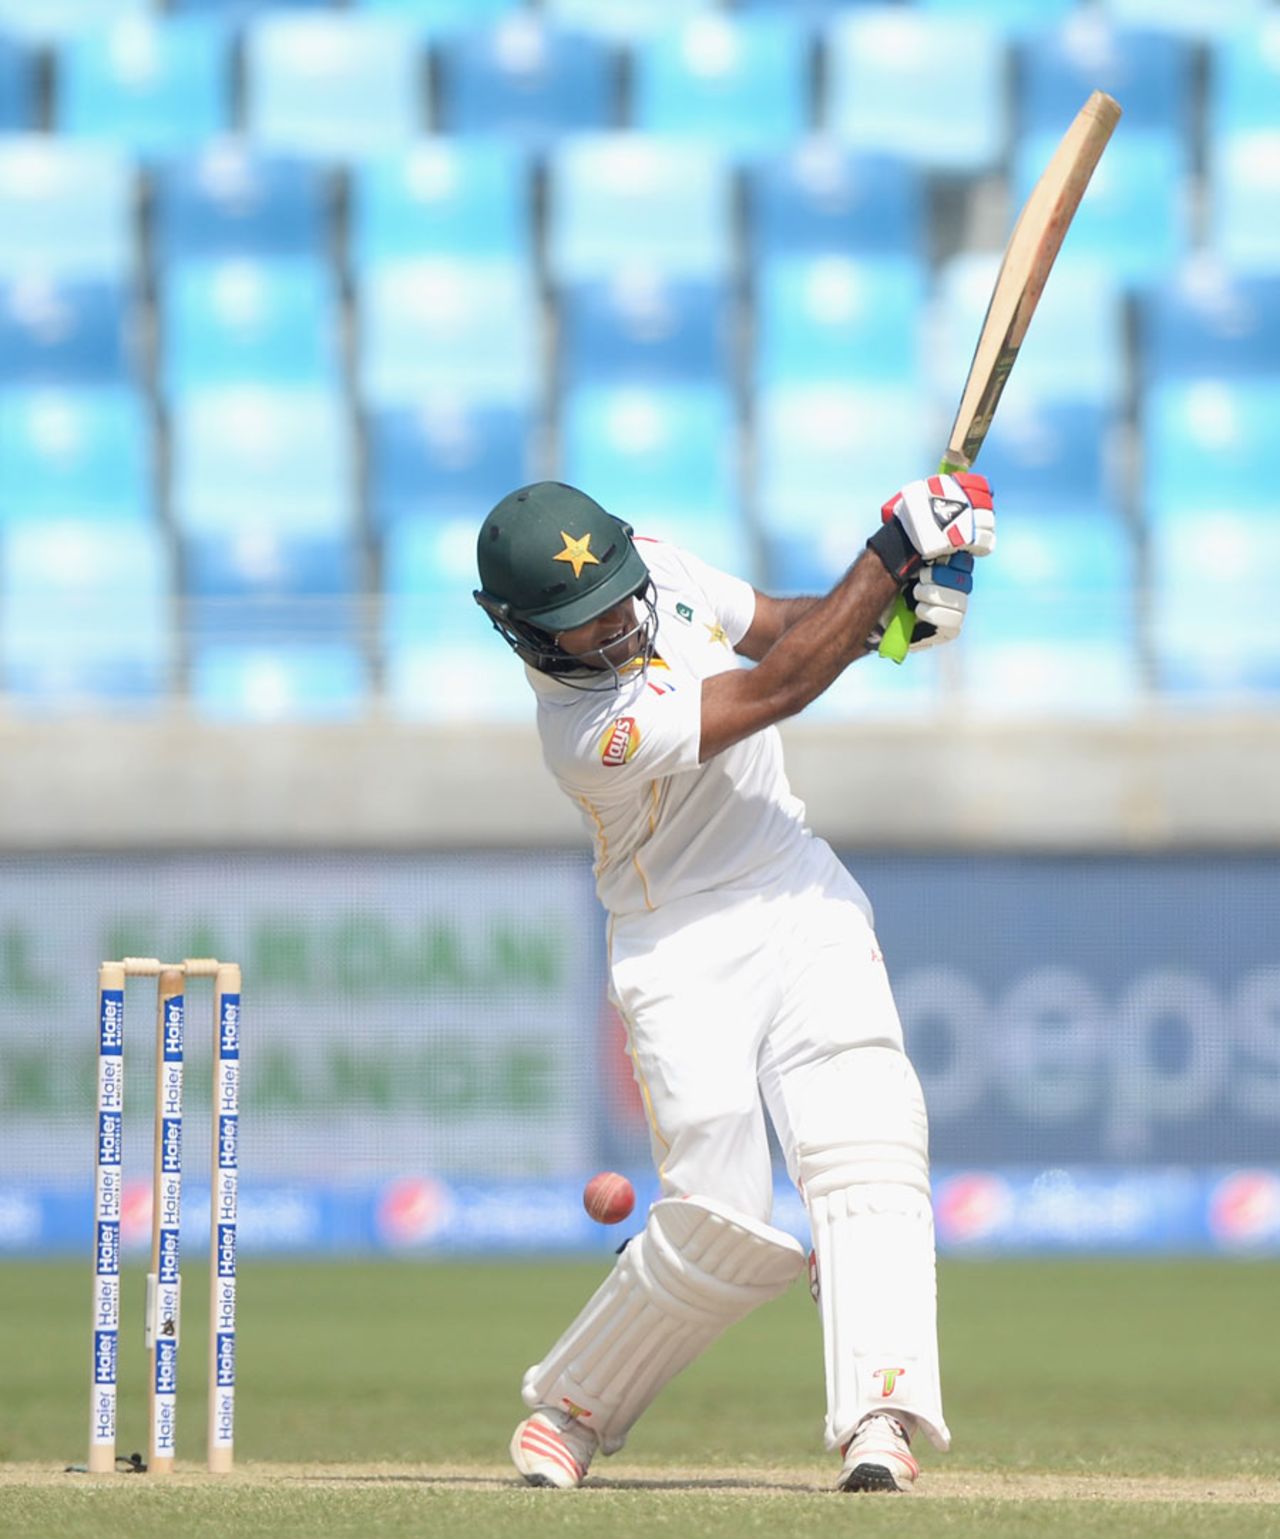 Asad Shafiq took a painful blow on the knee, Pakistan v England, 2nd Test, Dubai, 2nd day, October 23, 2015